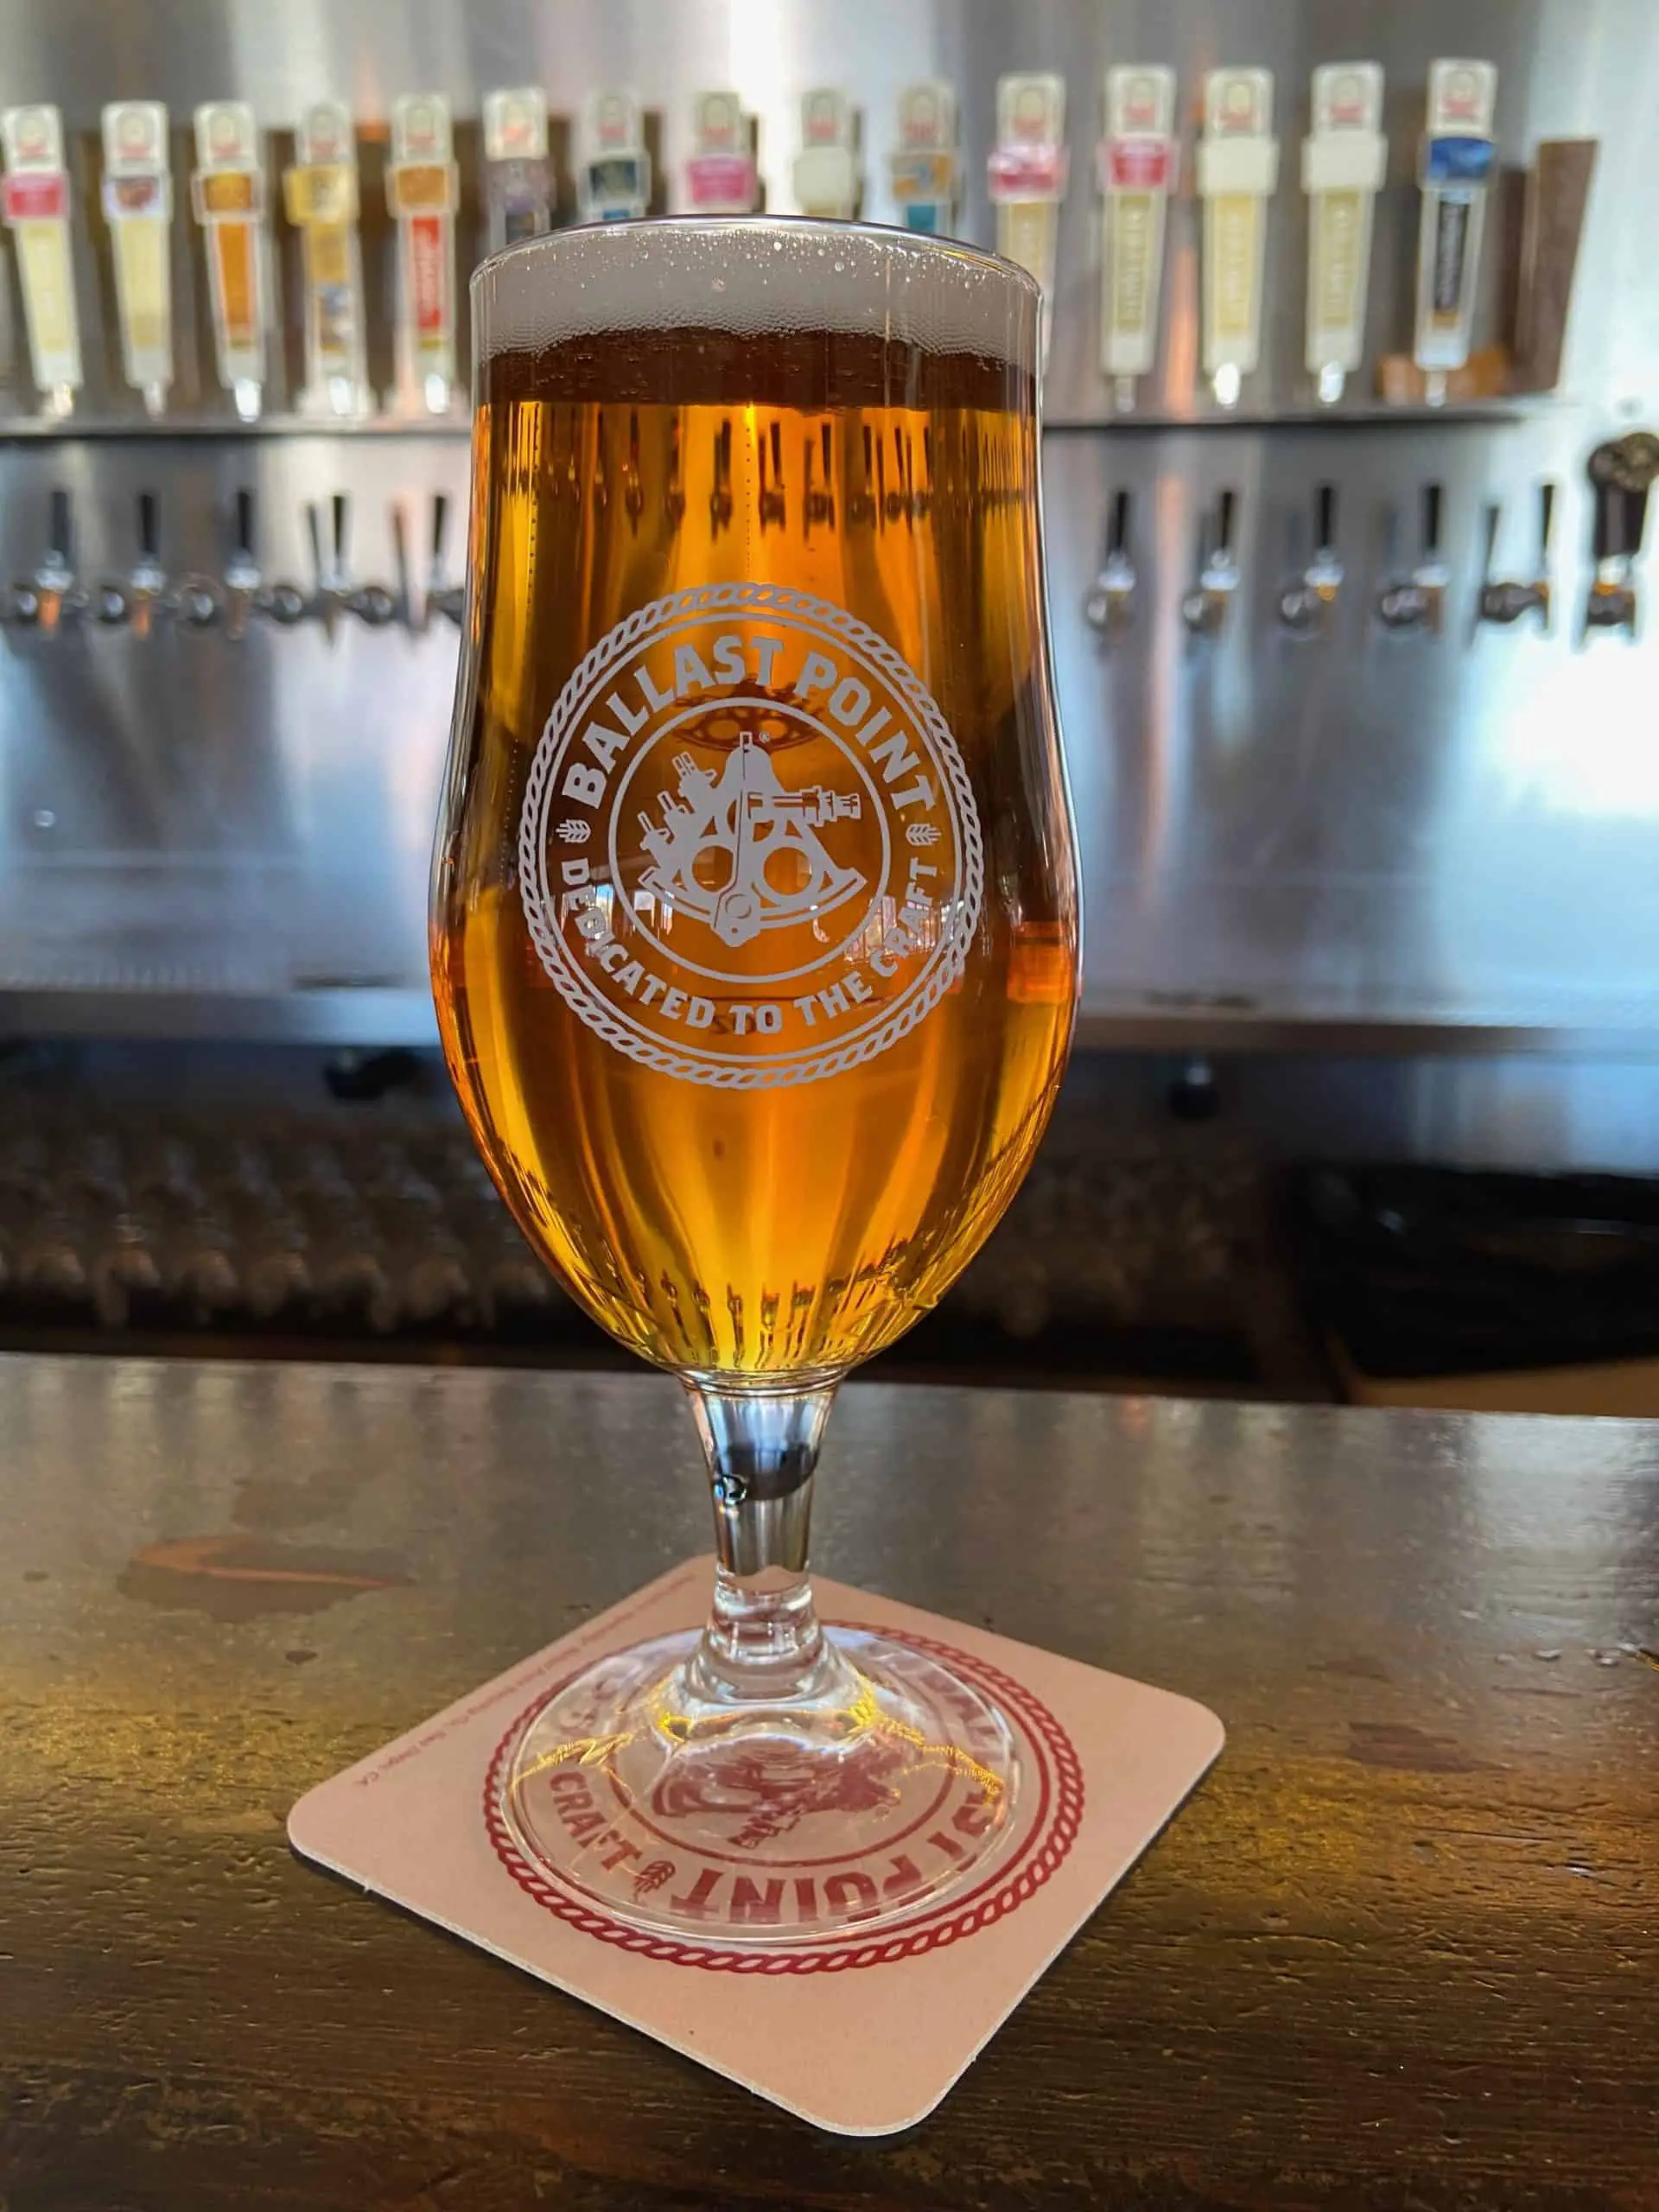 San Diego International collaborates to brew new beer from reclaimed airport water